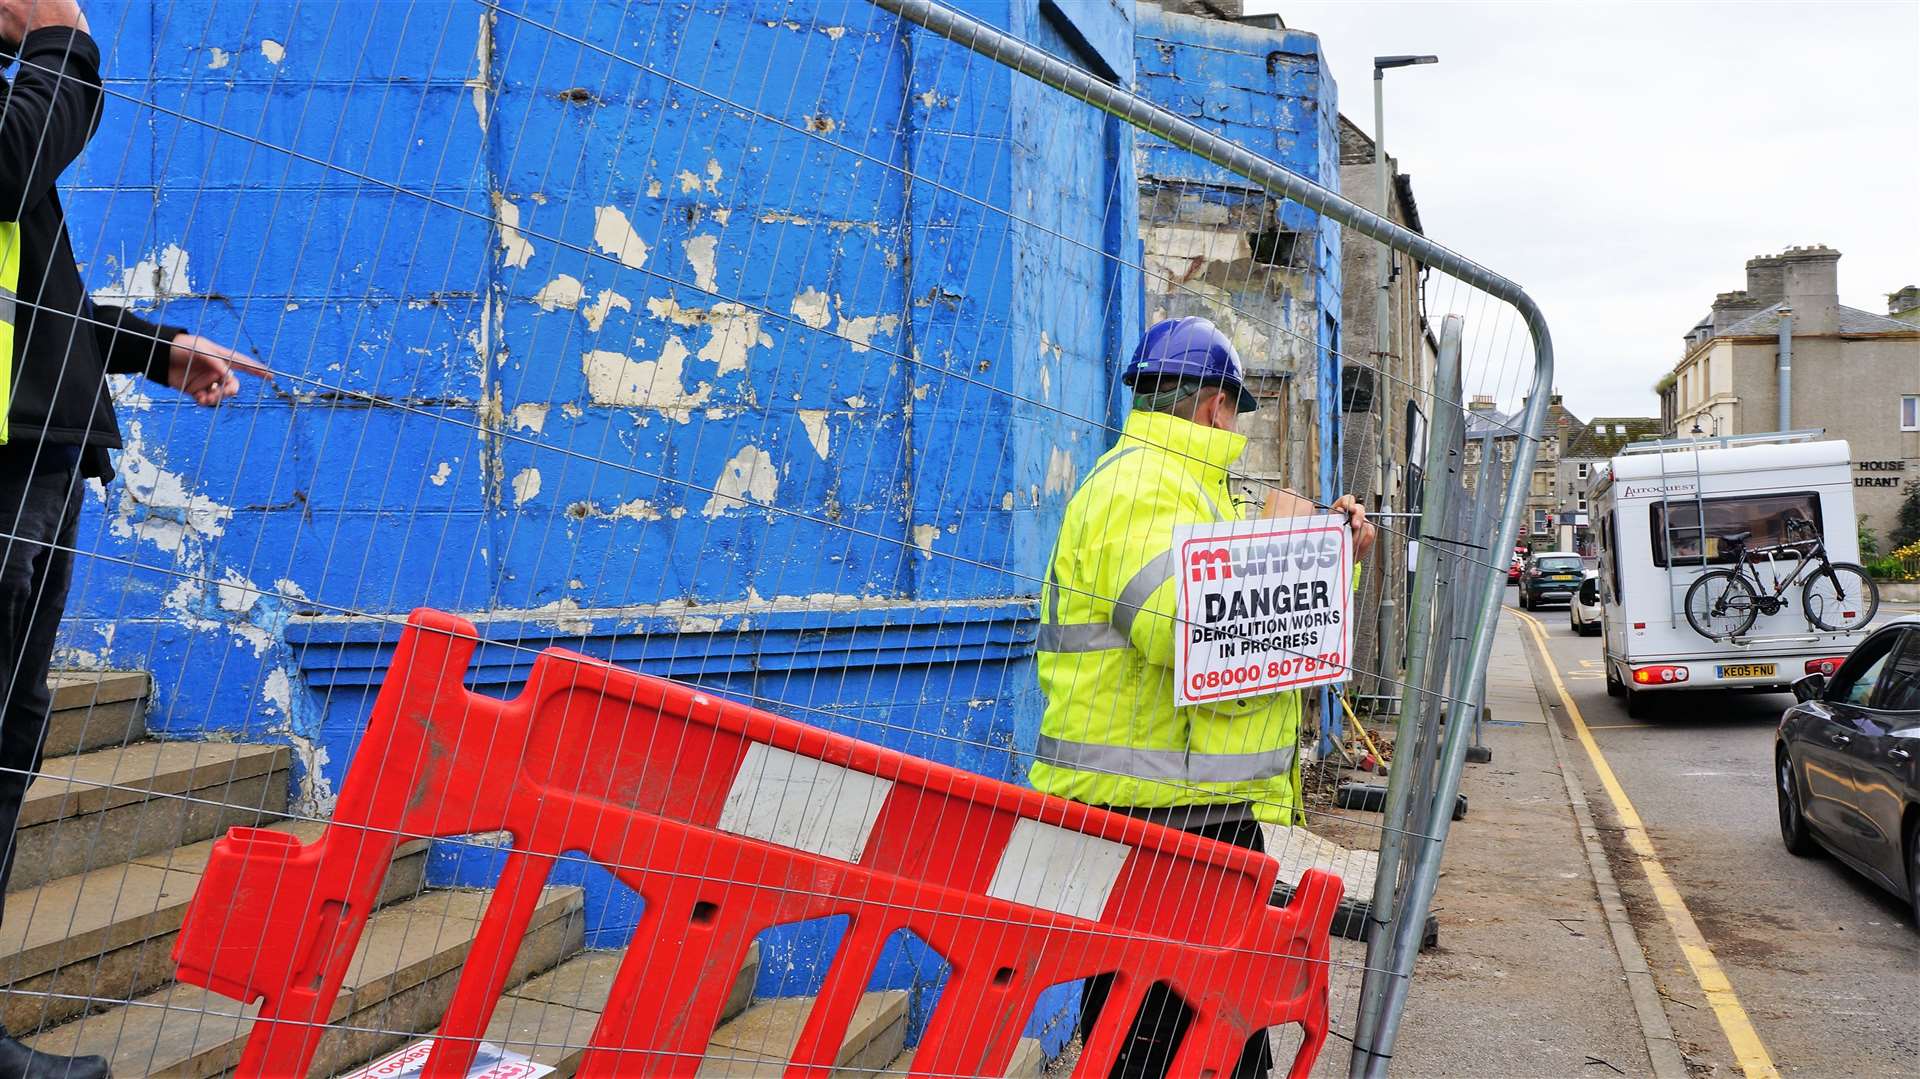 Munros workers sealed off the site and dealt with any hazardous materials before demolition took place. Pictures: DGS